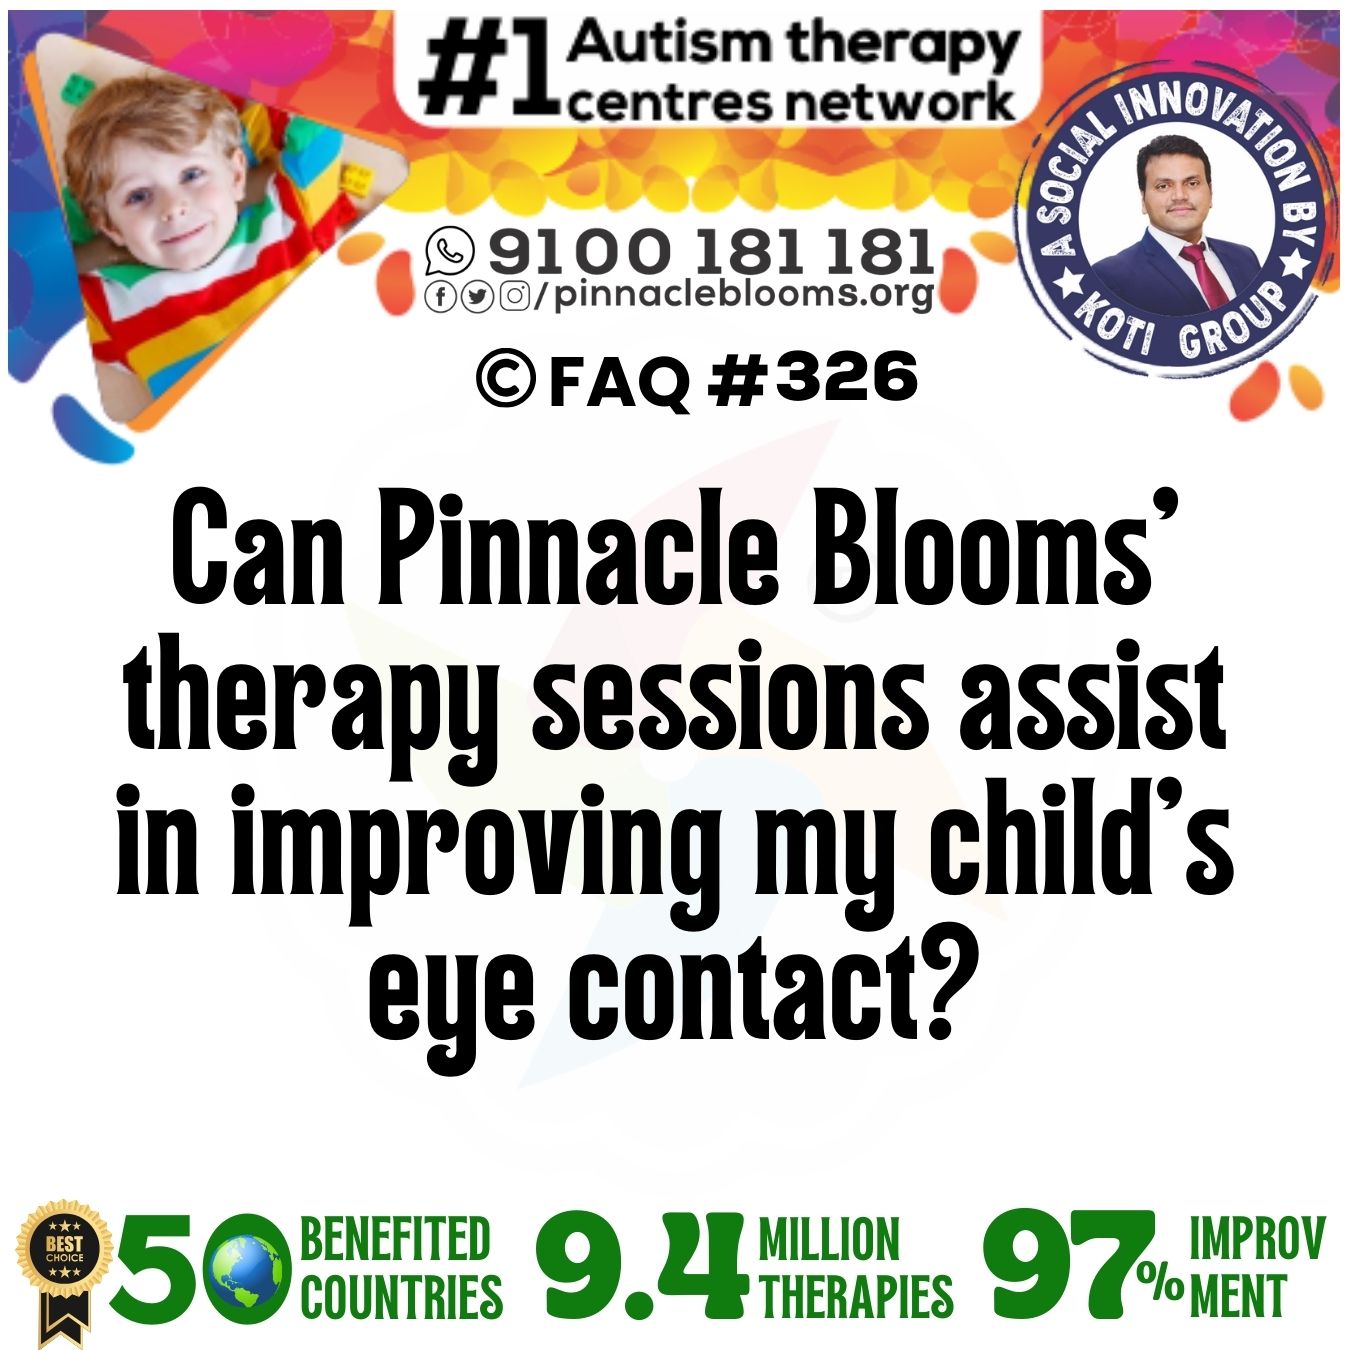 Can Pinnacle Blooms' therapy sessions assist in improving my child's eye contact?